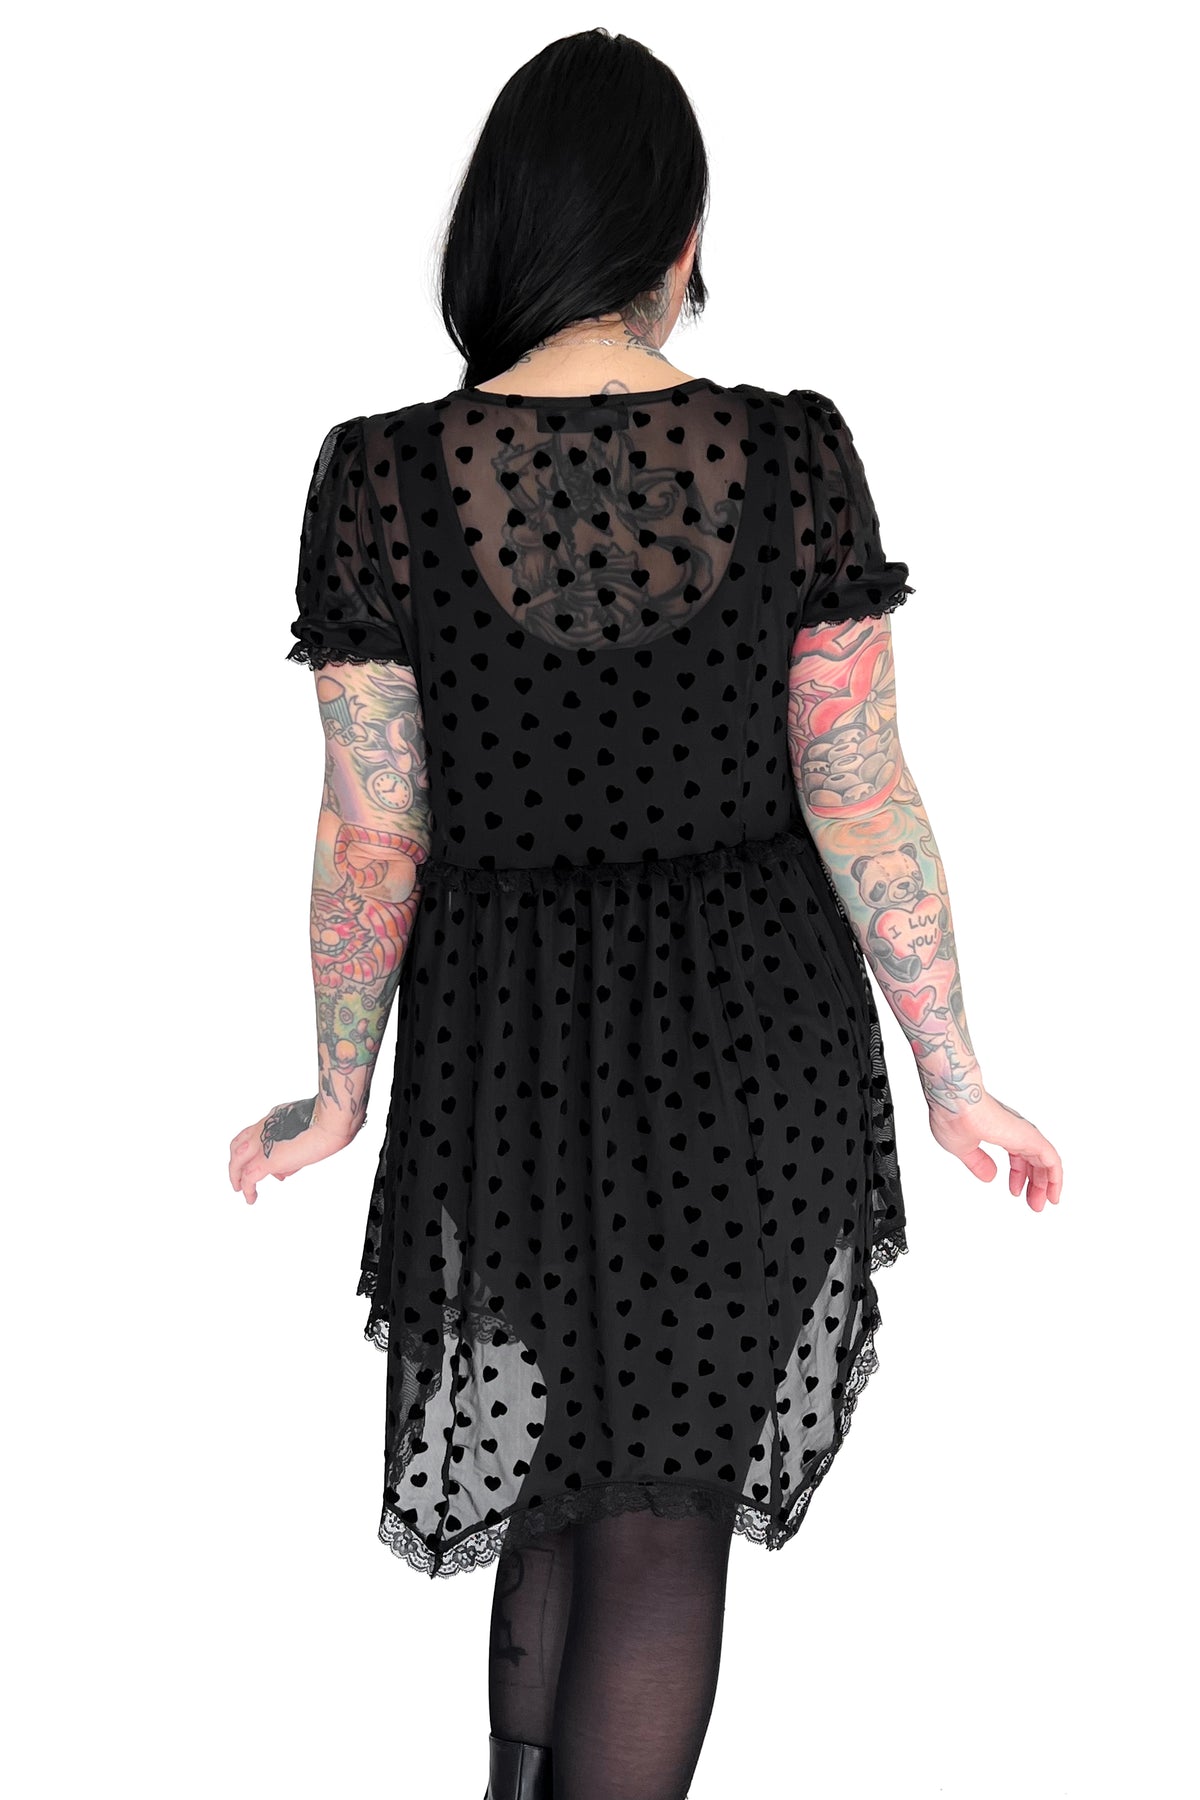 black mesh babydoll dress with flocked black hearts and lace trim